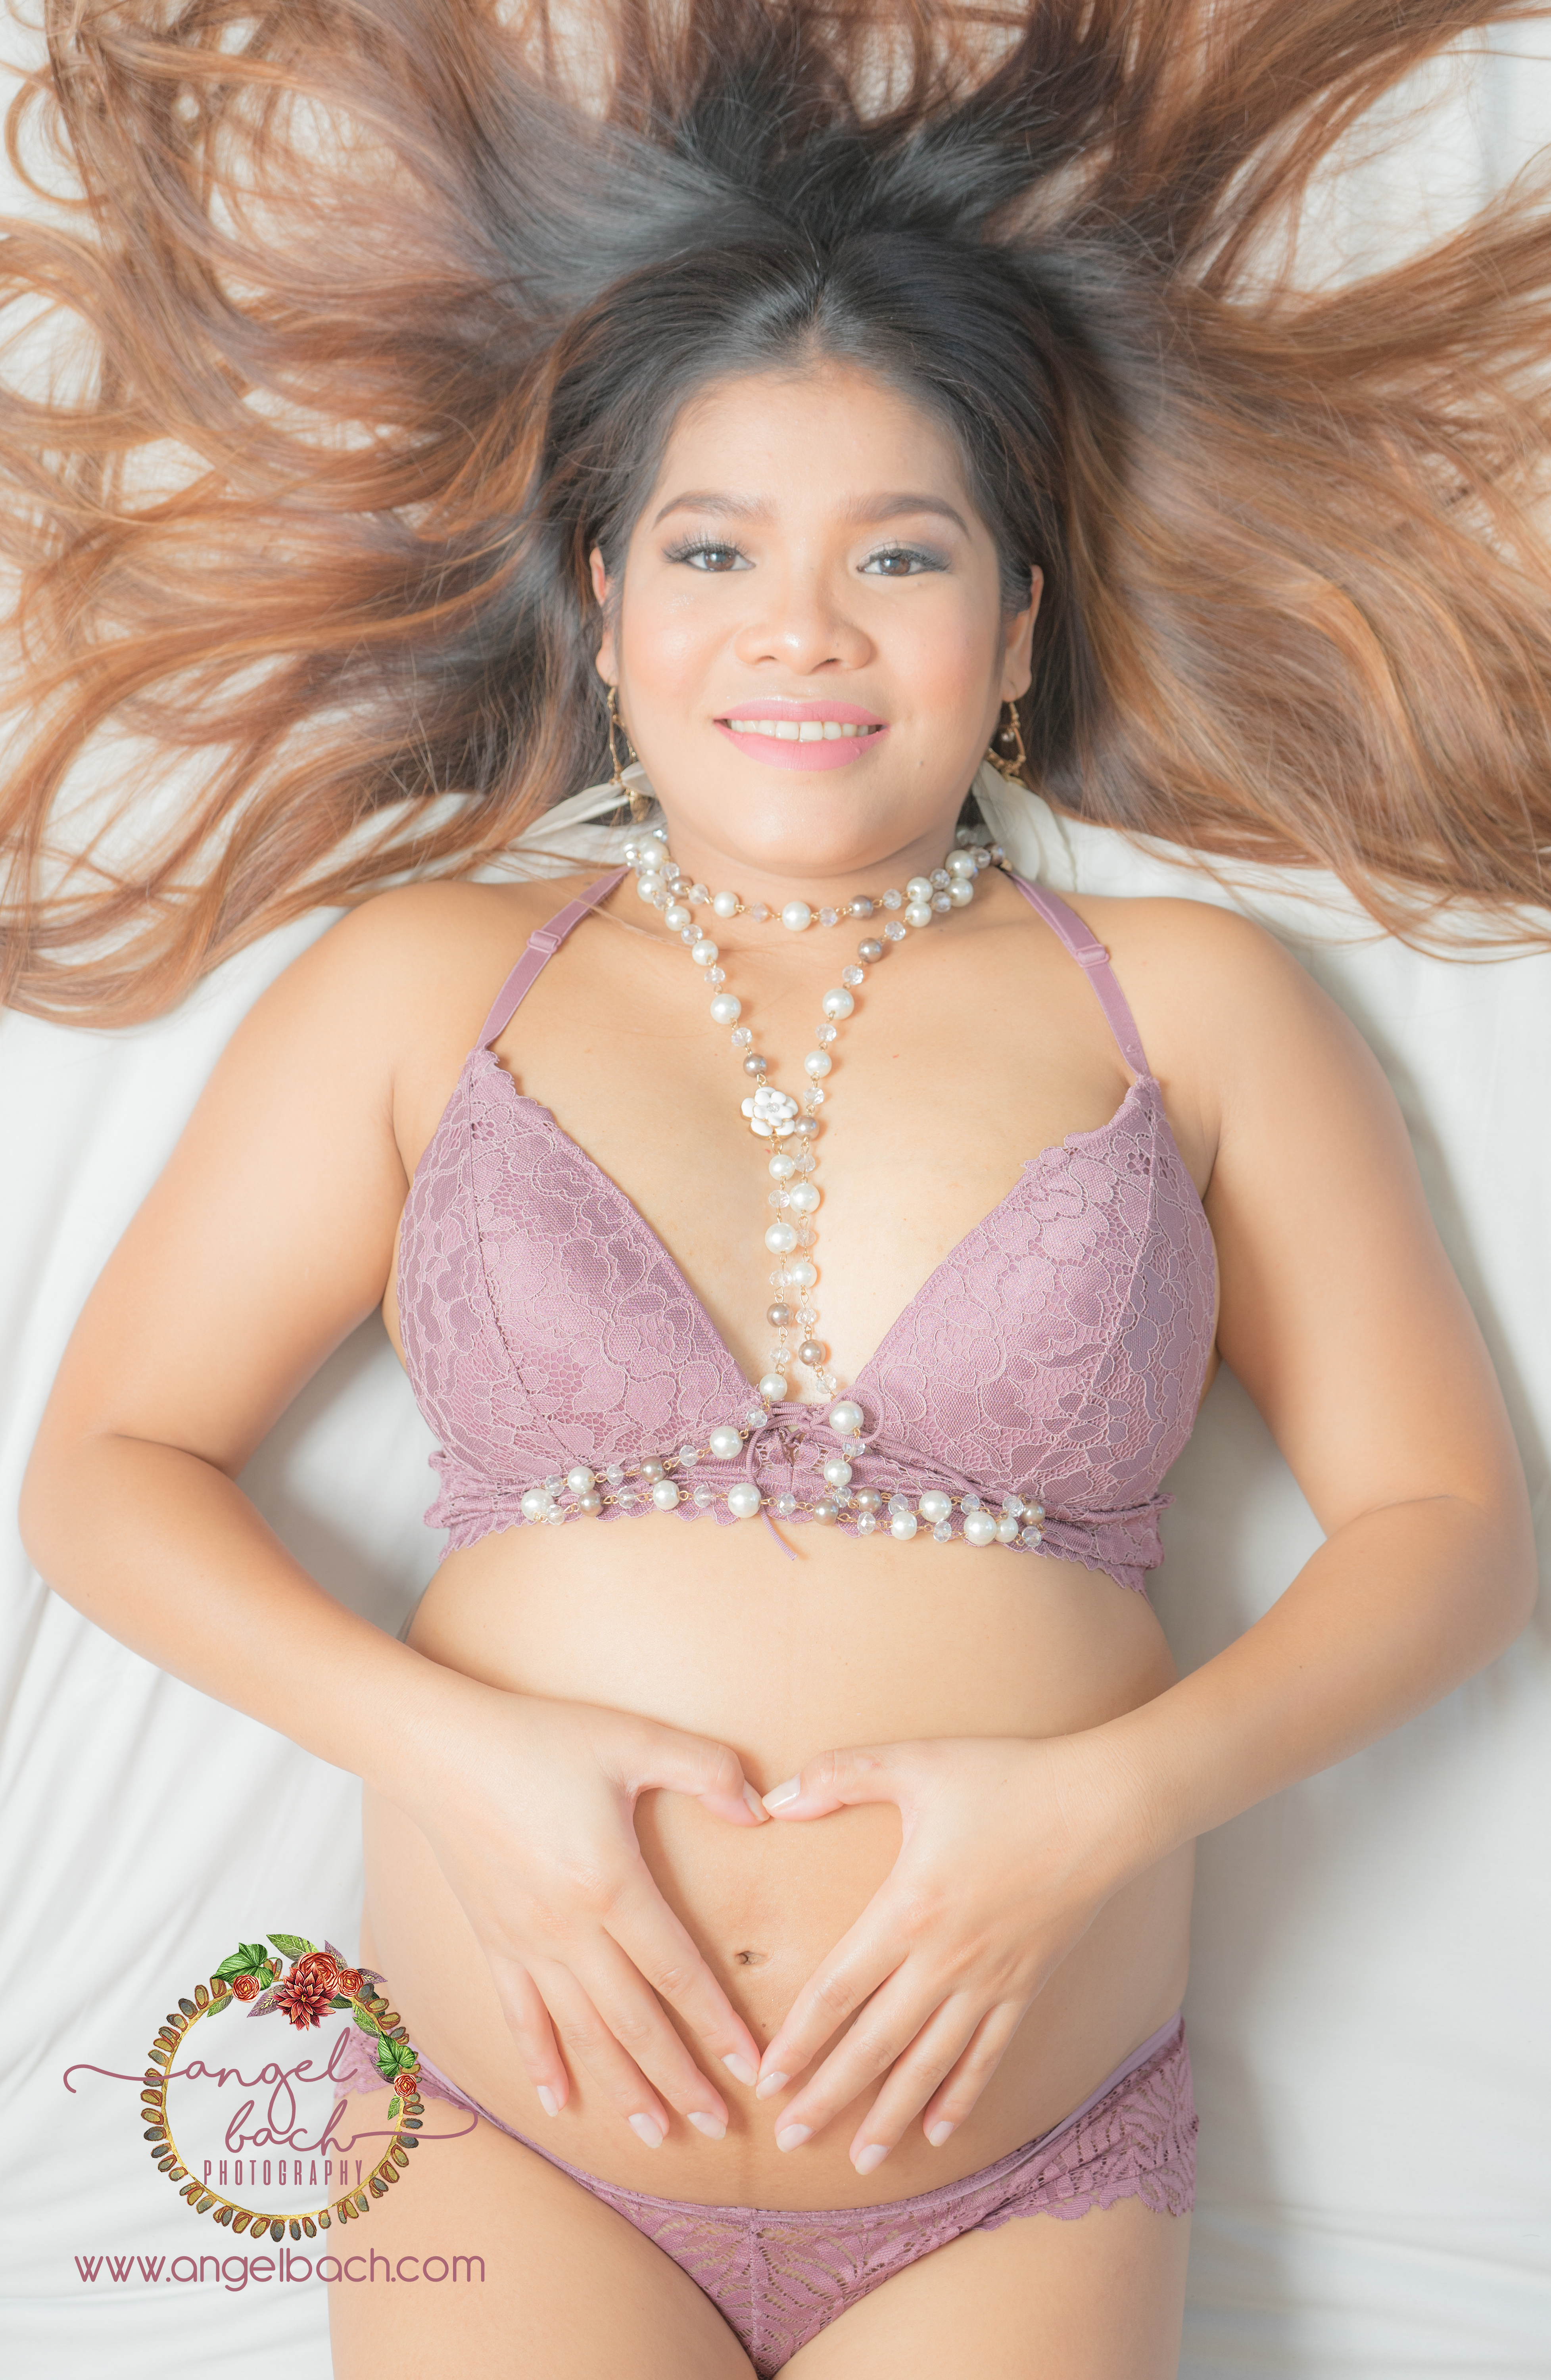 Intimate Maternity, Maternity Photoshoot, Pregnancy, 30 weeks pregnant, pinay mom, La Senza lingerie, Beautiful Pregnant, Photography, pregnancy glow